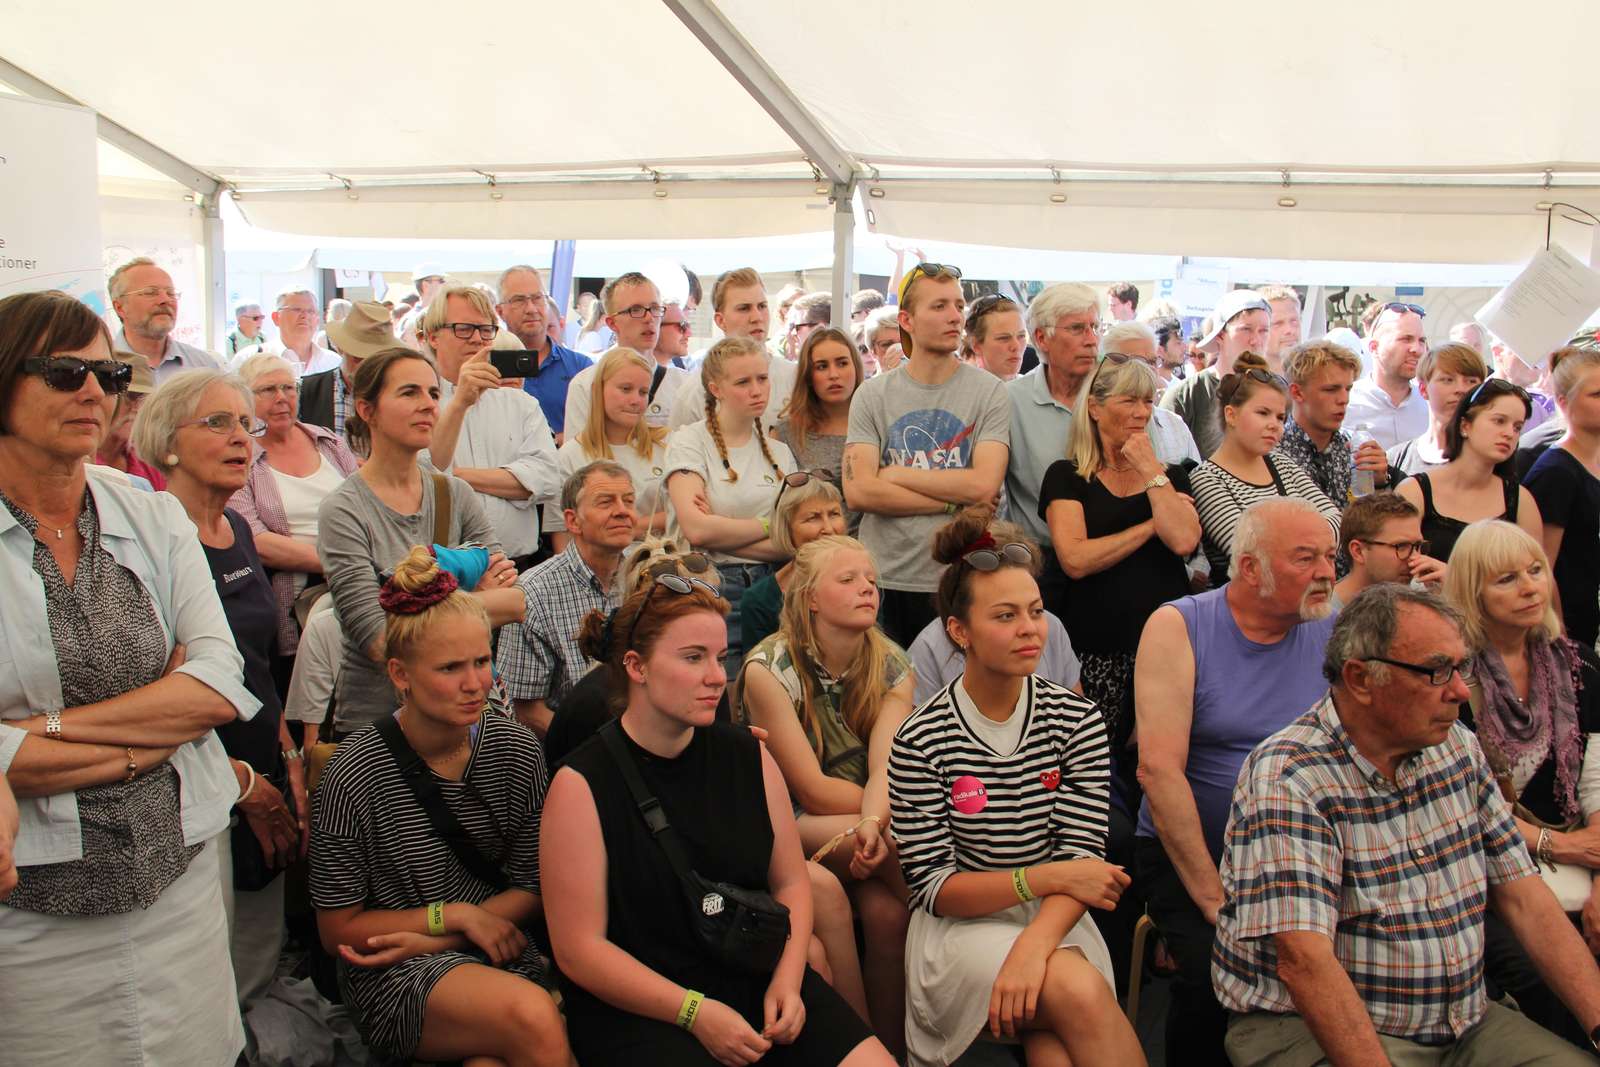 The people's meeting Bornholm 2015